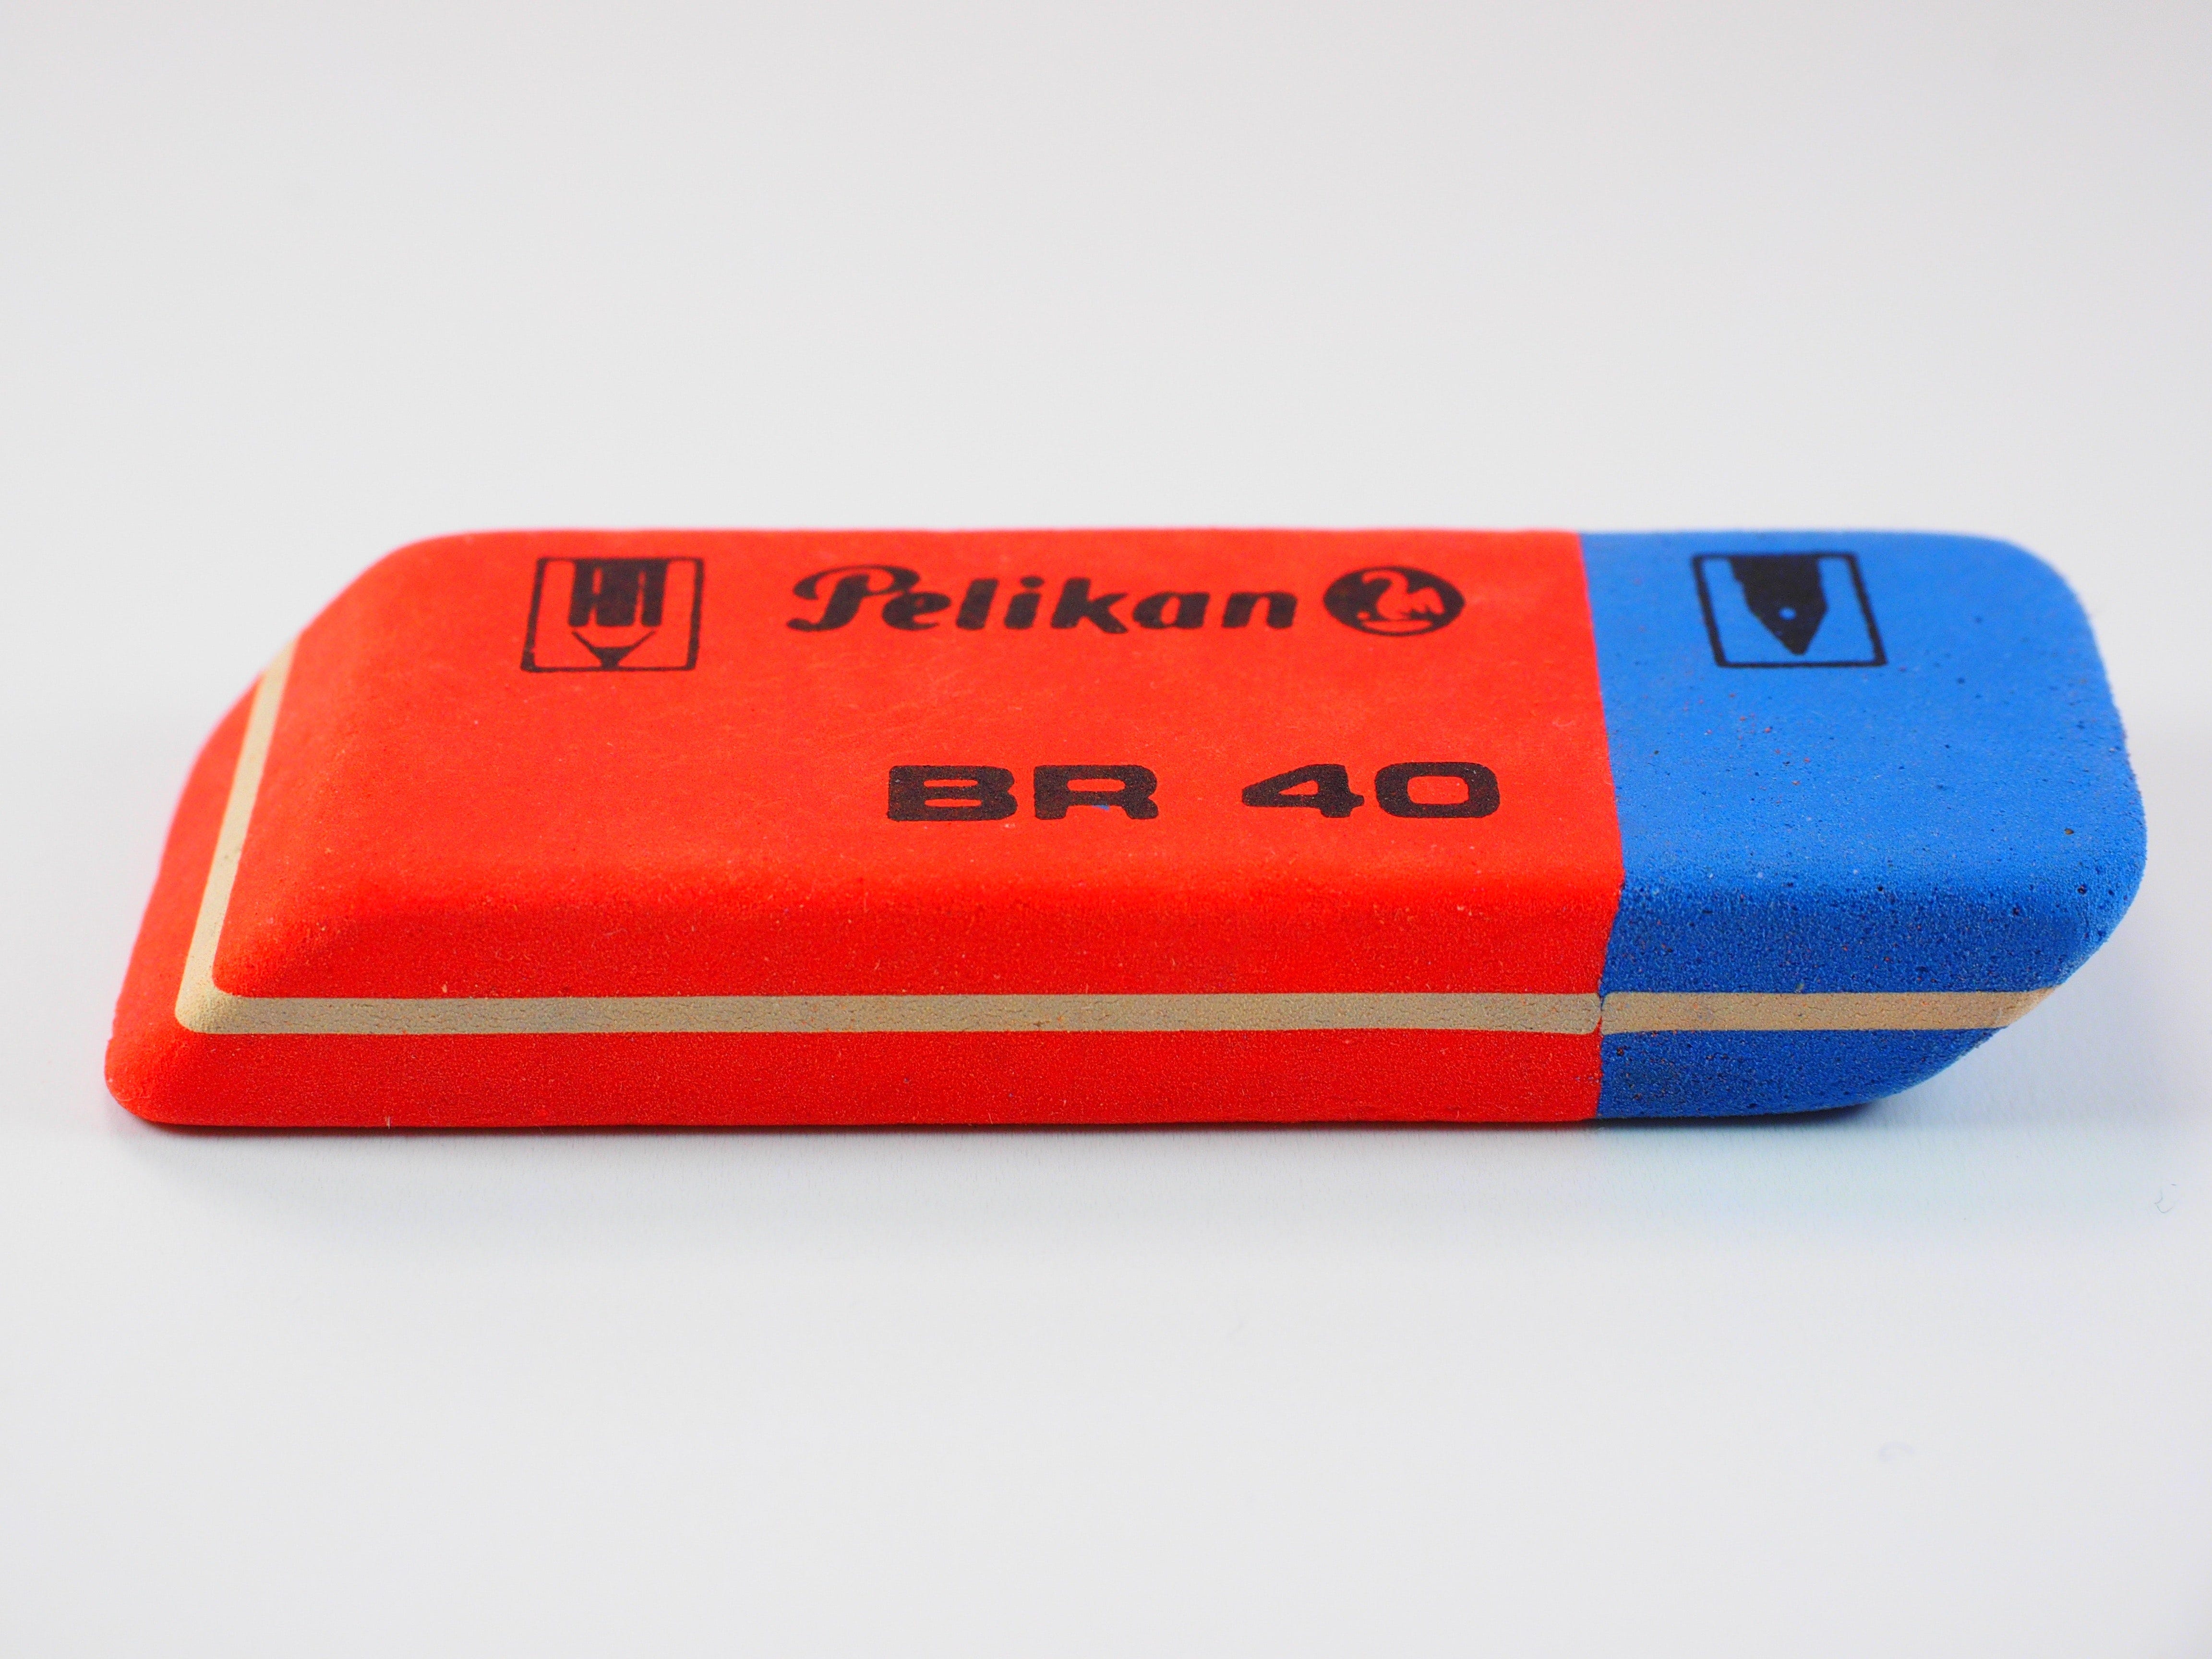 “Red and Blue Pelikan Br 40 Eraser on White Surface” by Pixabay